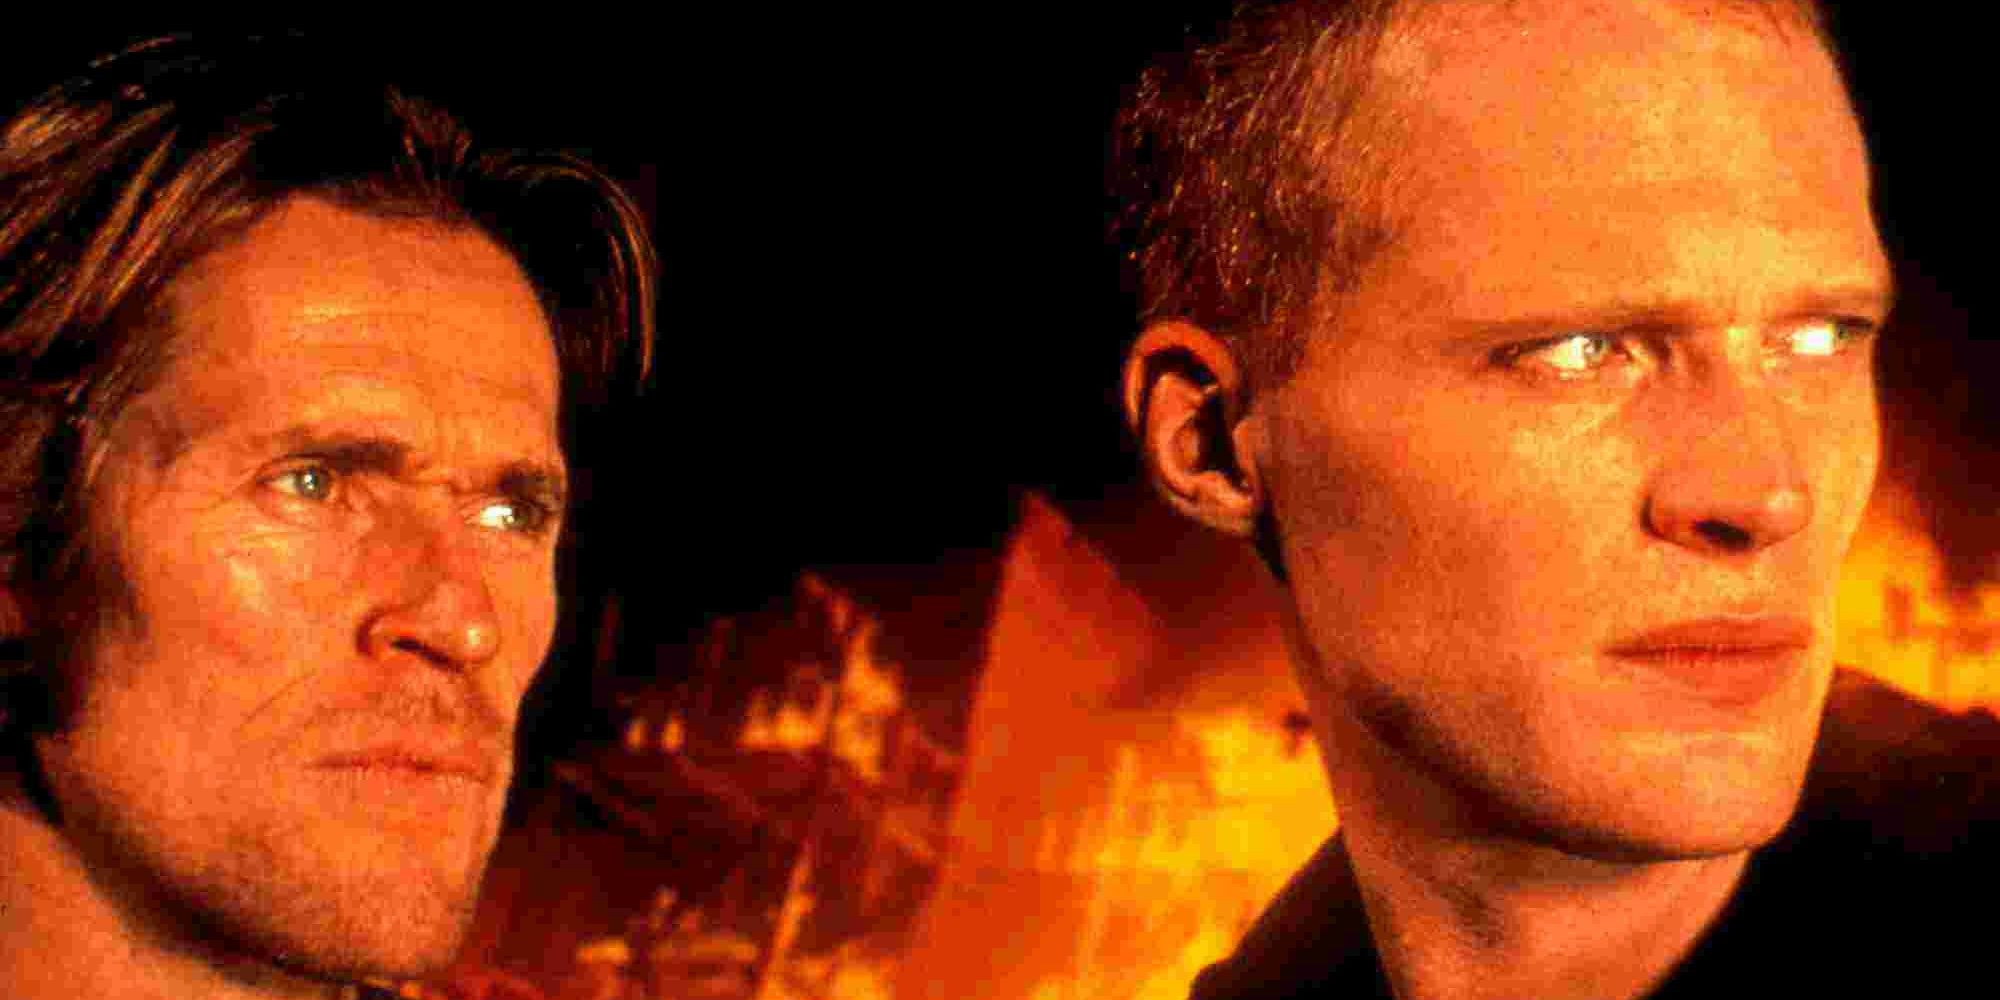 Willem Dafoe and Paul Bettany in The Reckoning.